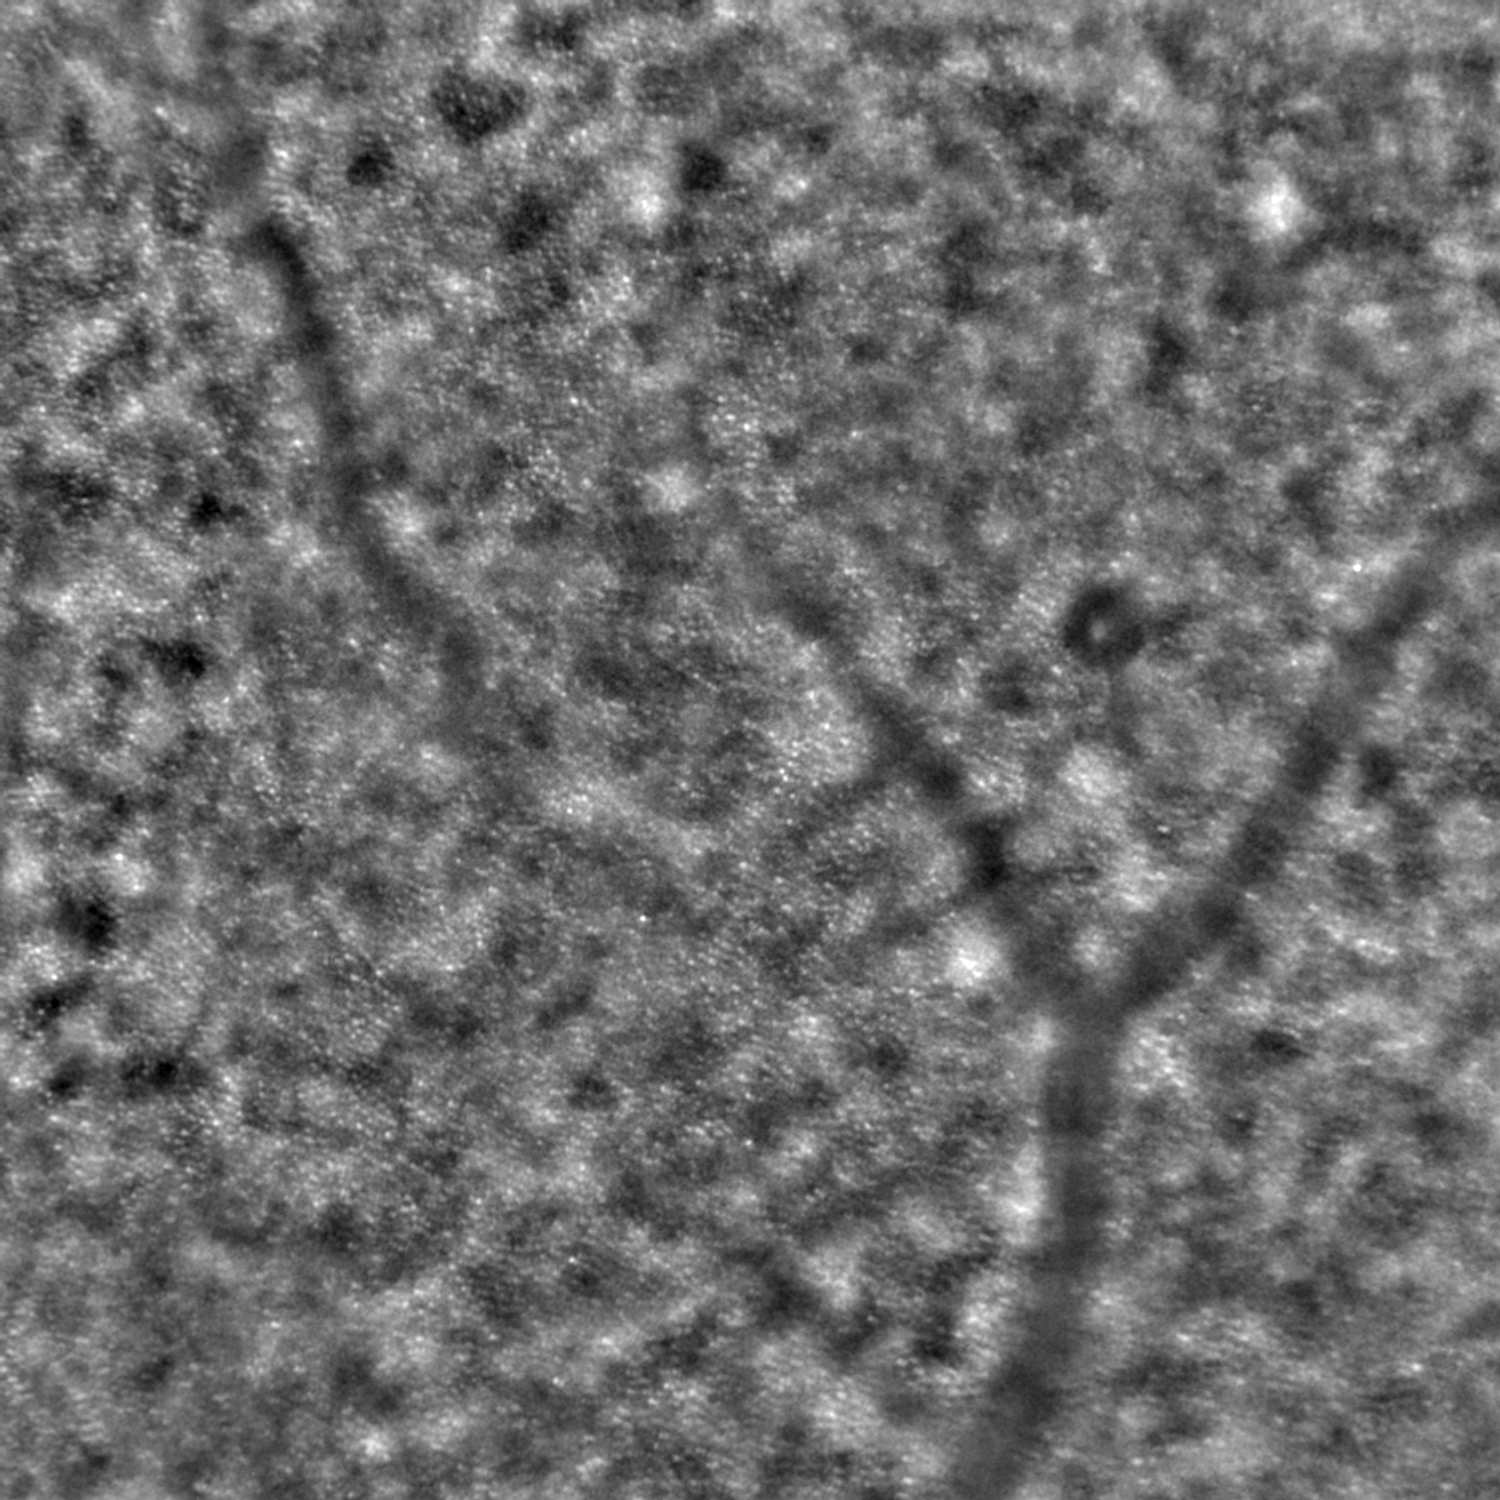 Microaneurism in a diabetic patient. This image was acquired while focusing the rtx1 at the photoreceptor layer. Although the aneurism is slightly out of focus, it is highly visible. Diabetic retinopathy could not be detected by other techniques in this patient. See also the next image gallery. Courtesy Dr Marco Lombardo, Bietti Fundation, Roma, Italy